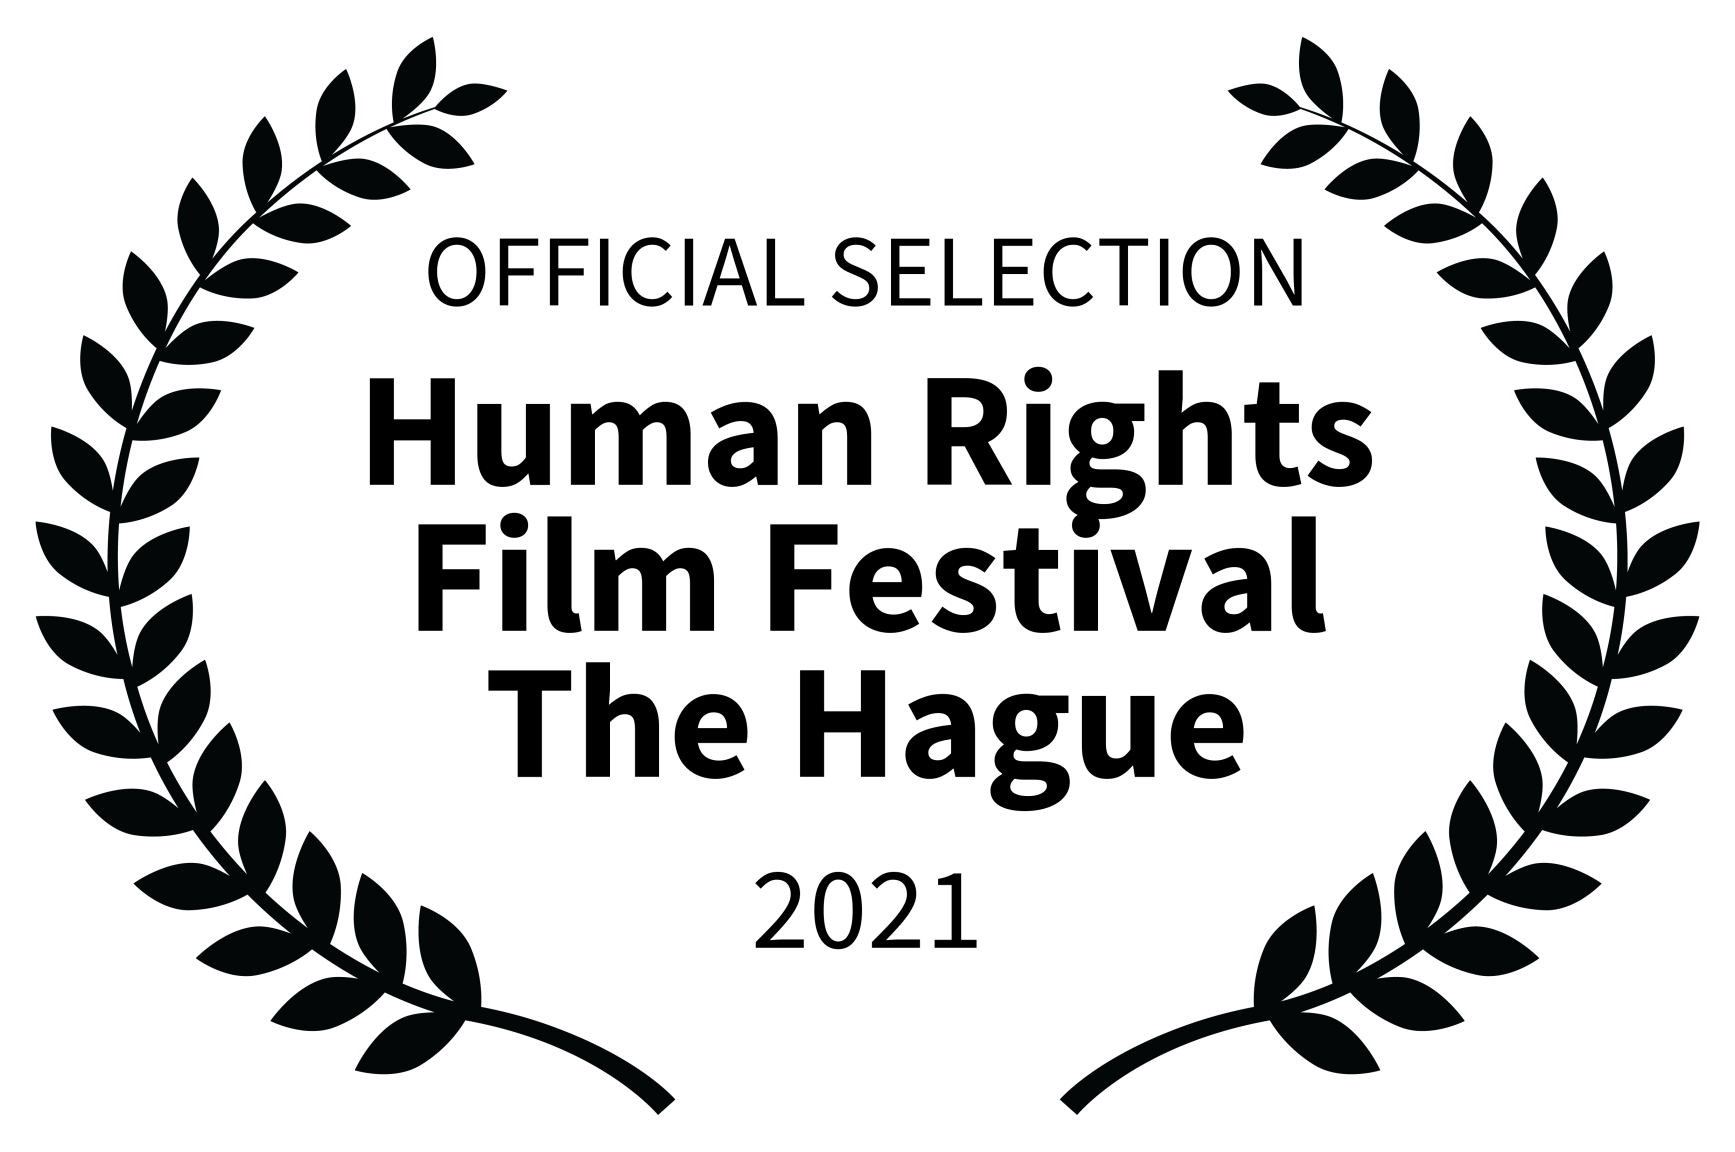 OFFICIAL_SELECTION_-_Human_Rights_Film_Festival_The_Hague_-_2021.png